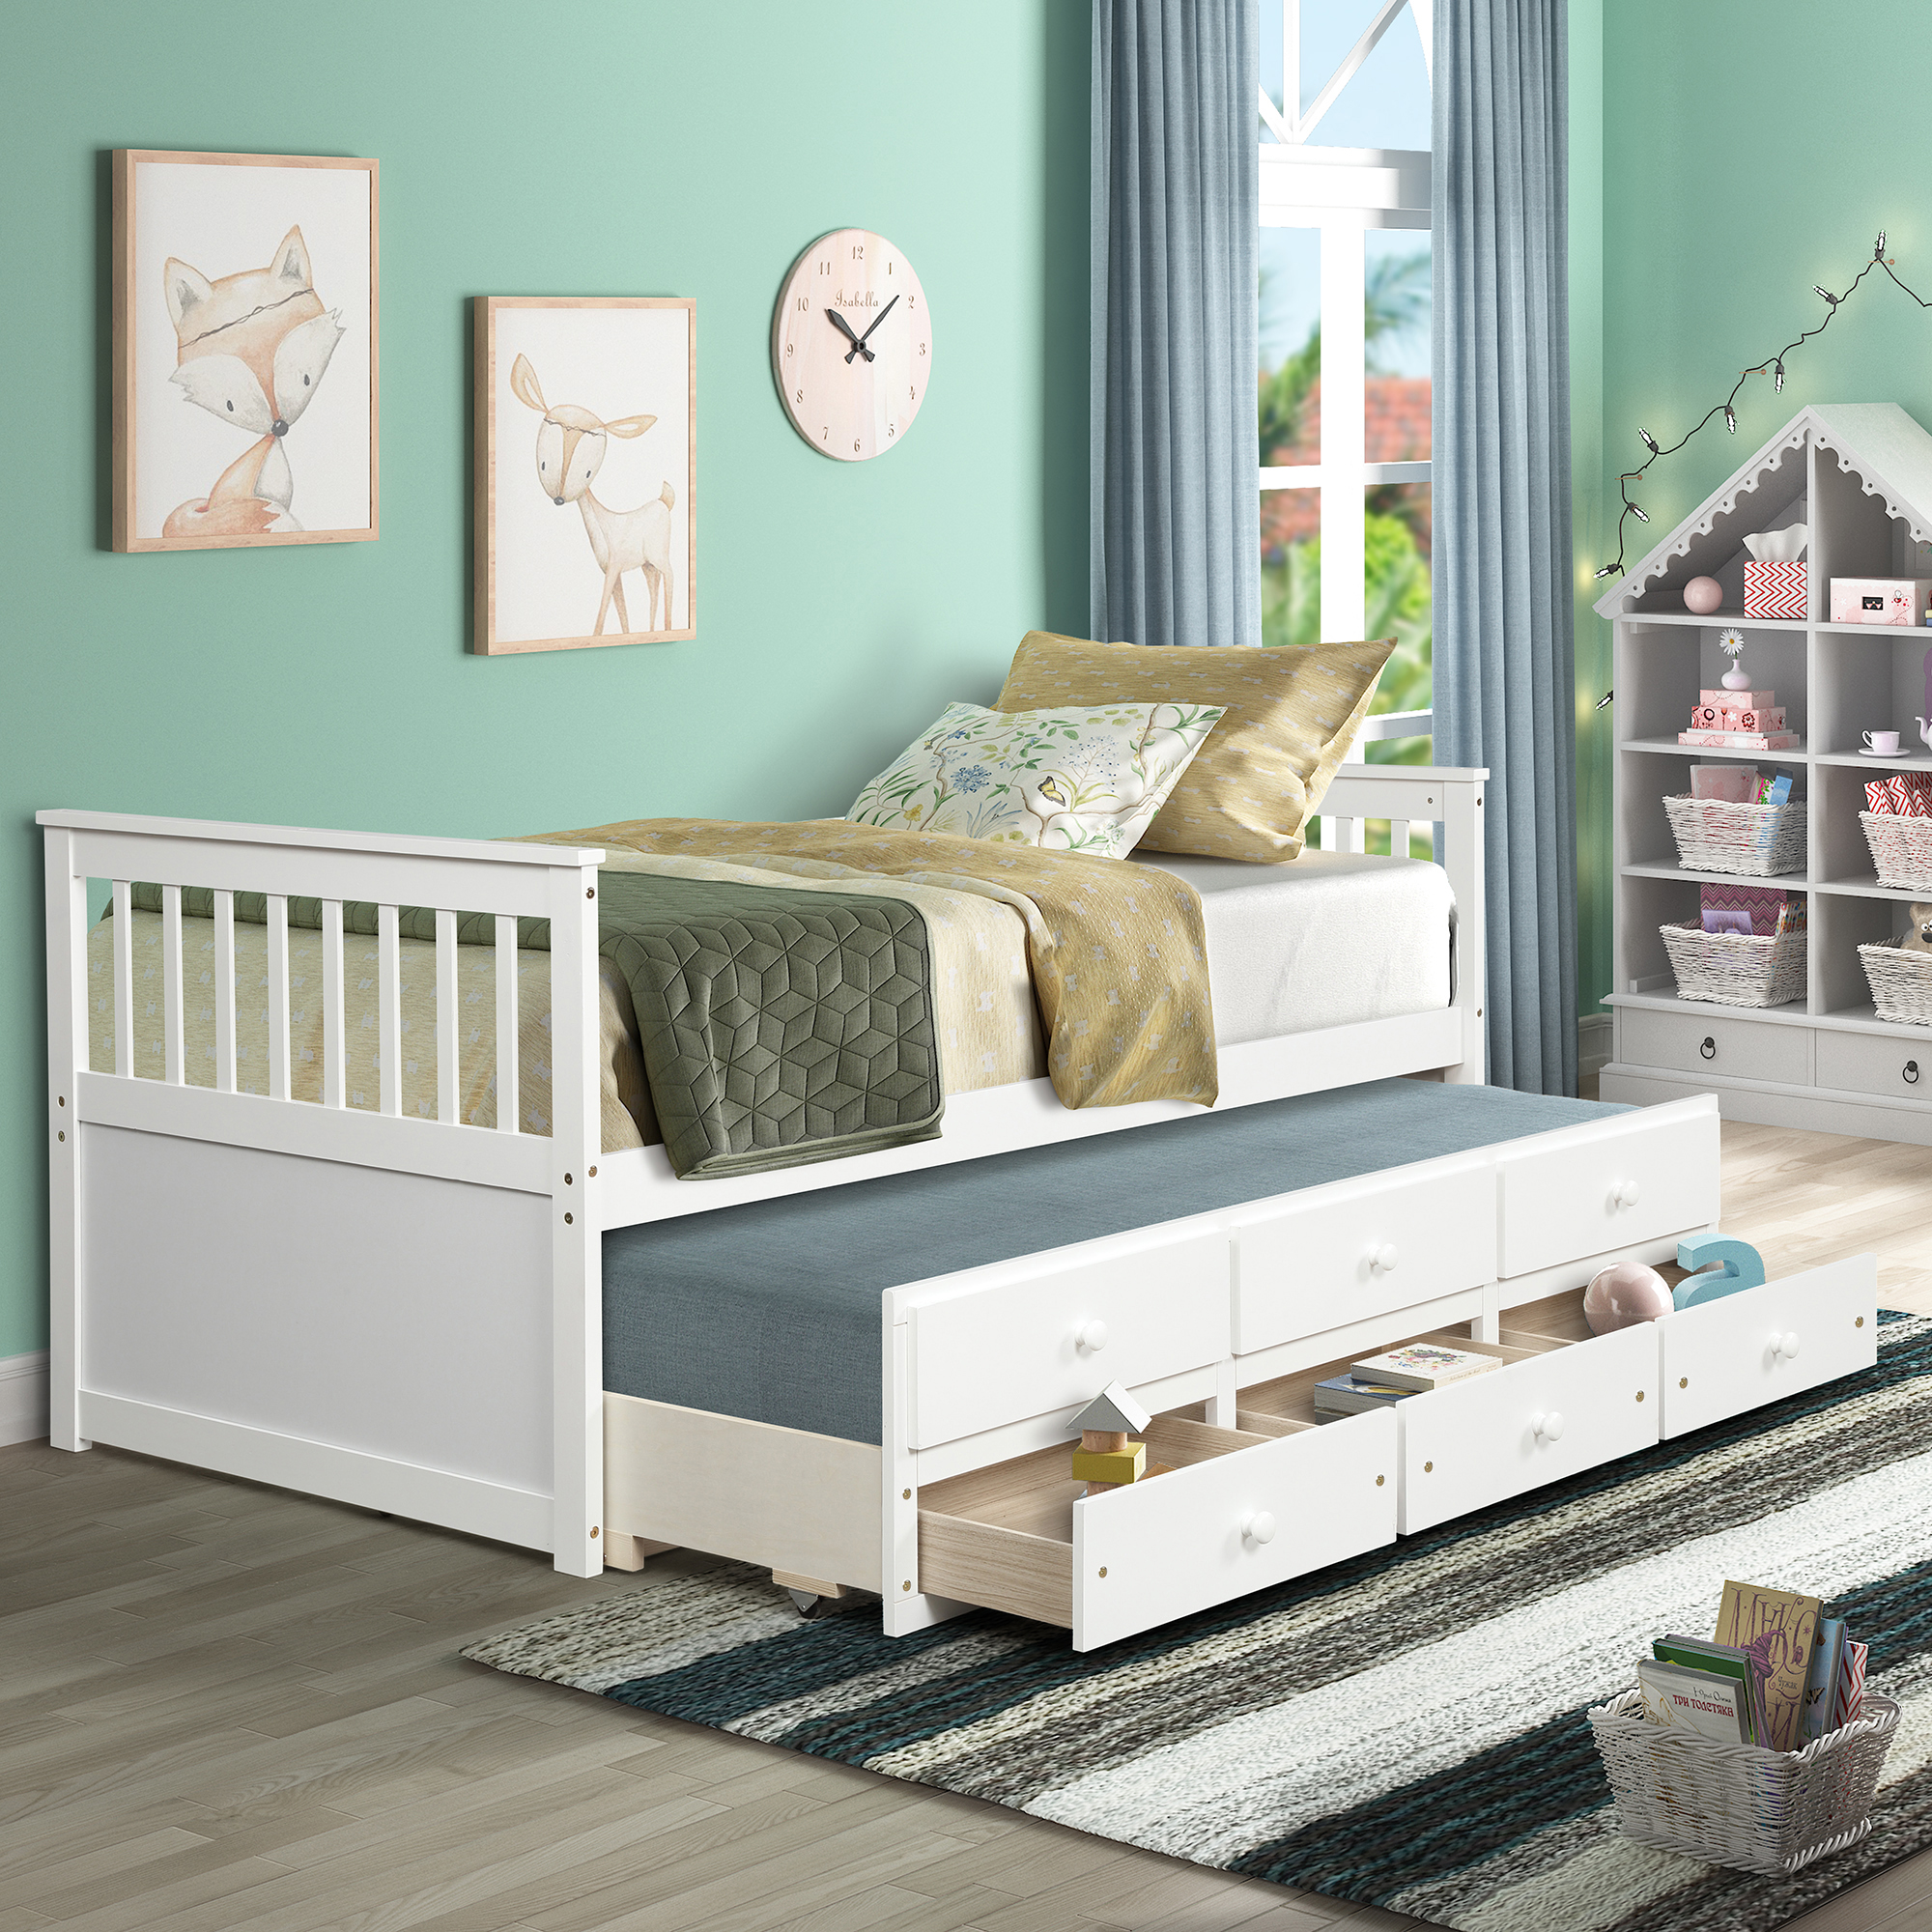 Captain's Bed Twin Daybed With Trundle Bed And Storage Drawers